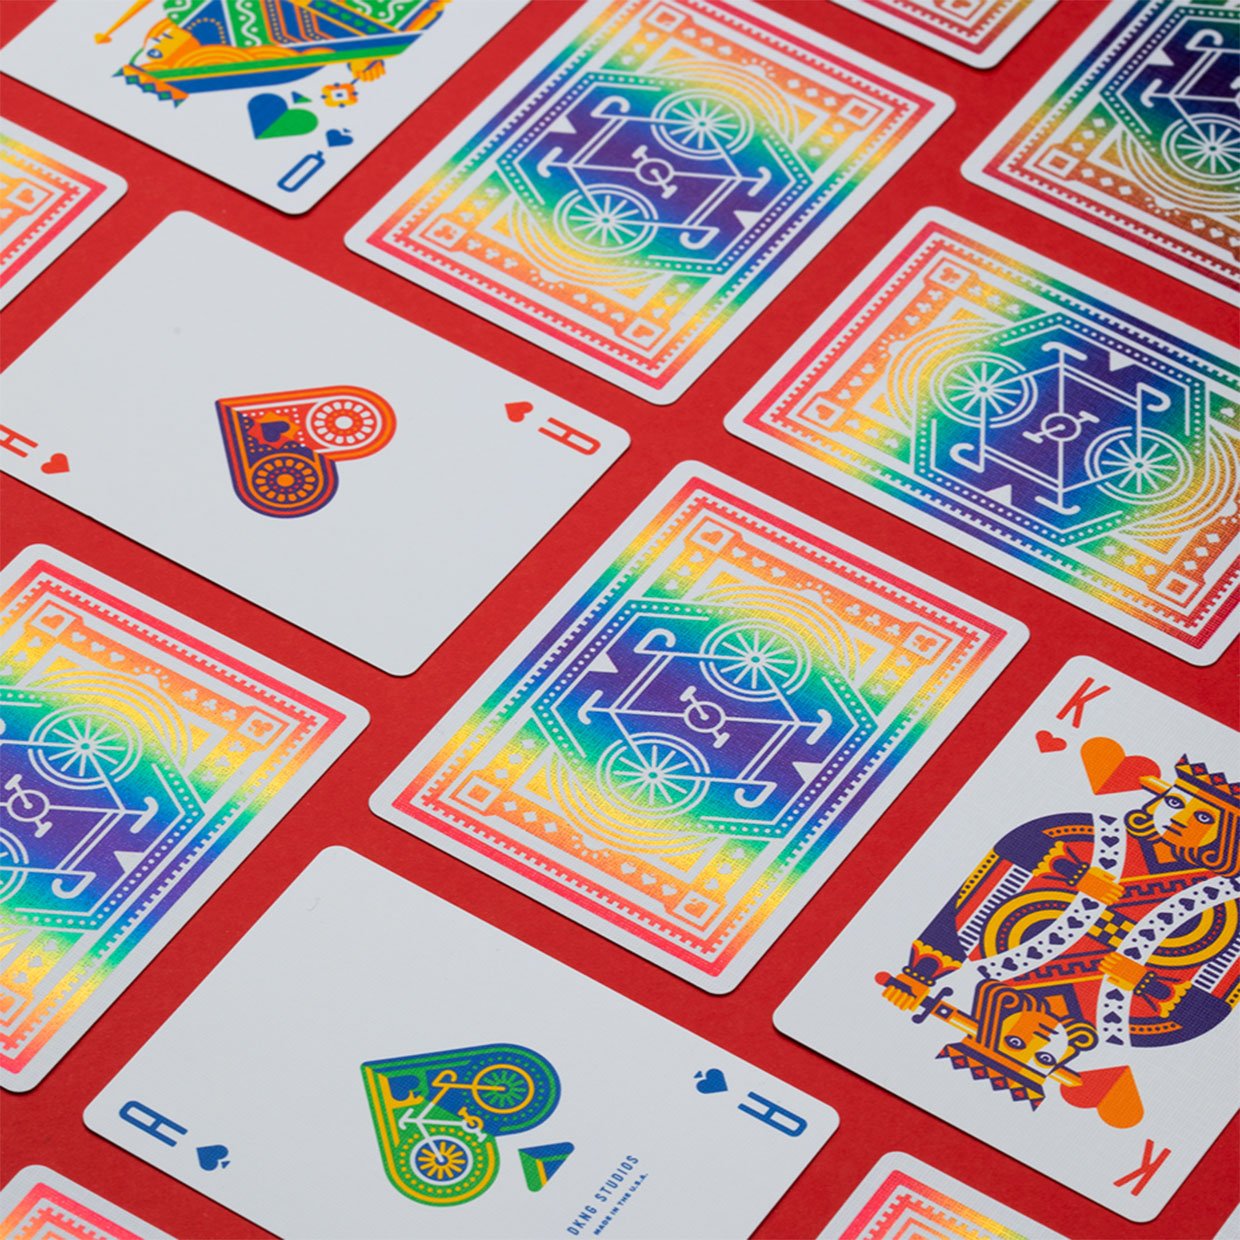 DKNG Rainbow Wheels Playing Cards